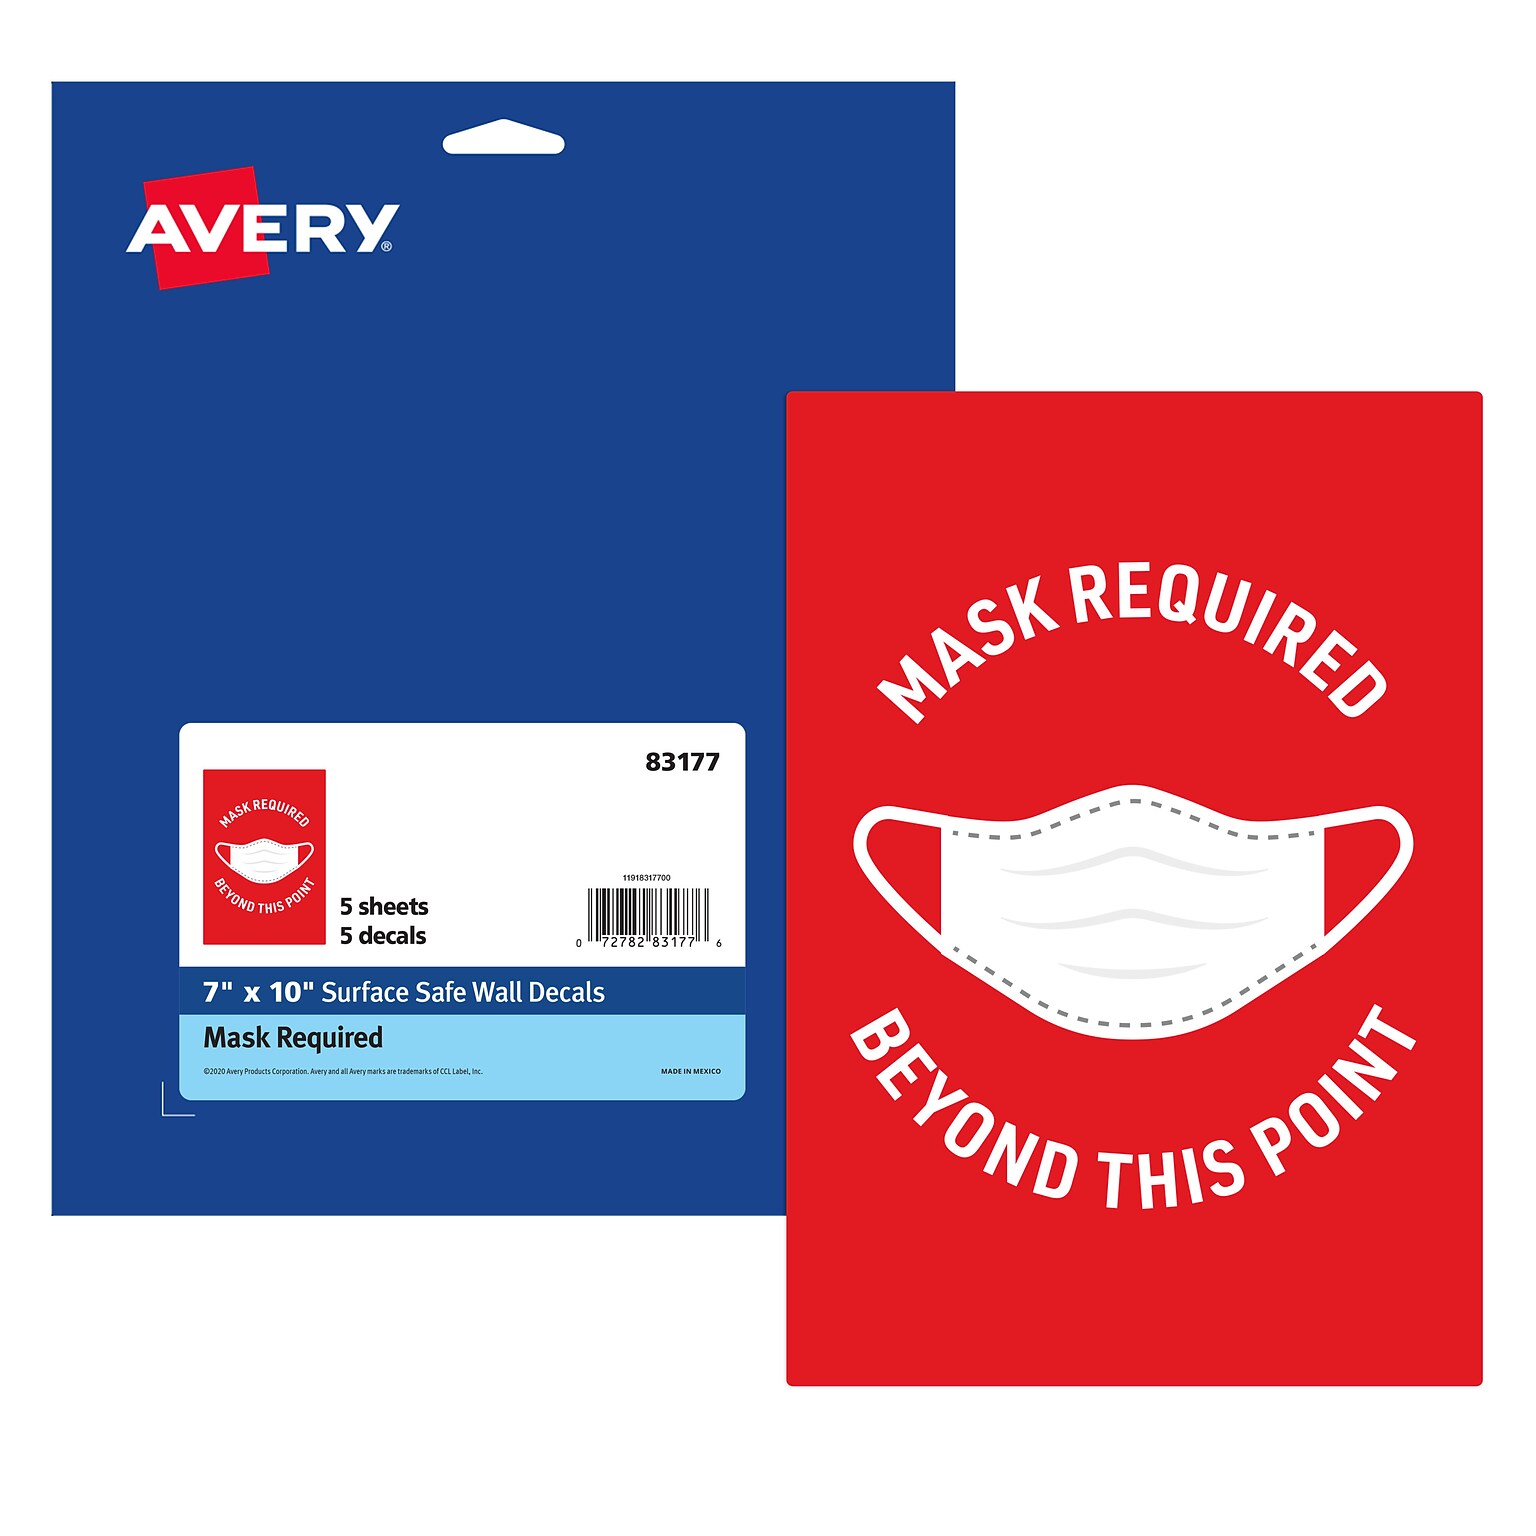 Avery Surface Safe Mask Required Beyond This Point Preprinted Wall Decals, 7 x 10, Red/White, 5 Pack (83177)